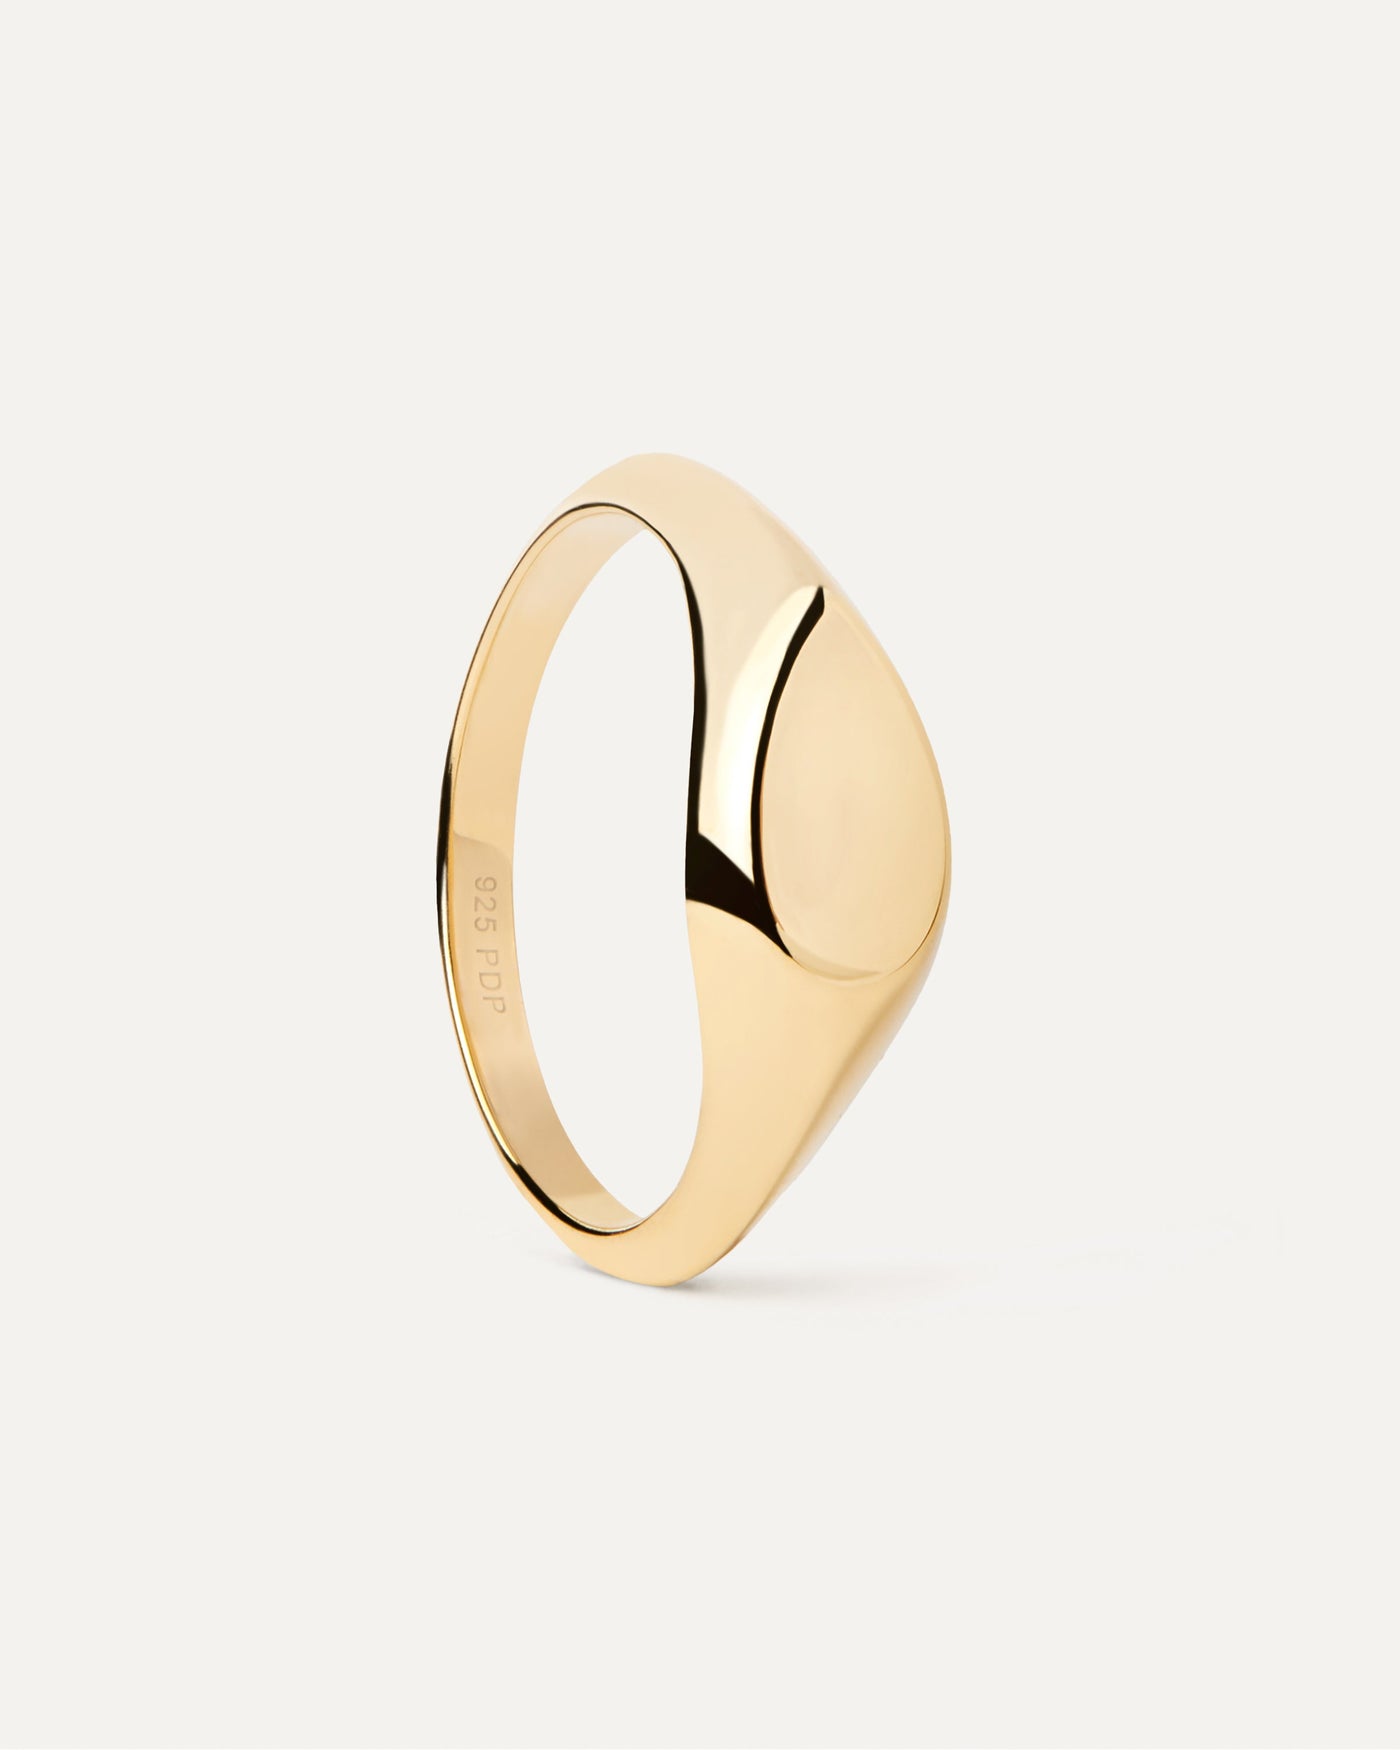 2023 Selection | Devi Stamp Ring. Gold-plated signet ring with pear shape flat top design. Get the latest arrival from PDPAOLA. Place your order safely and get this Best Seller. Free Shipping.